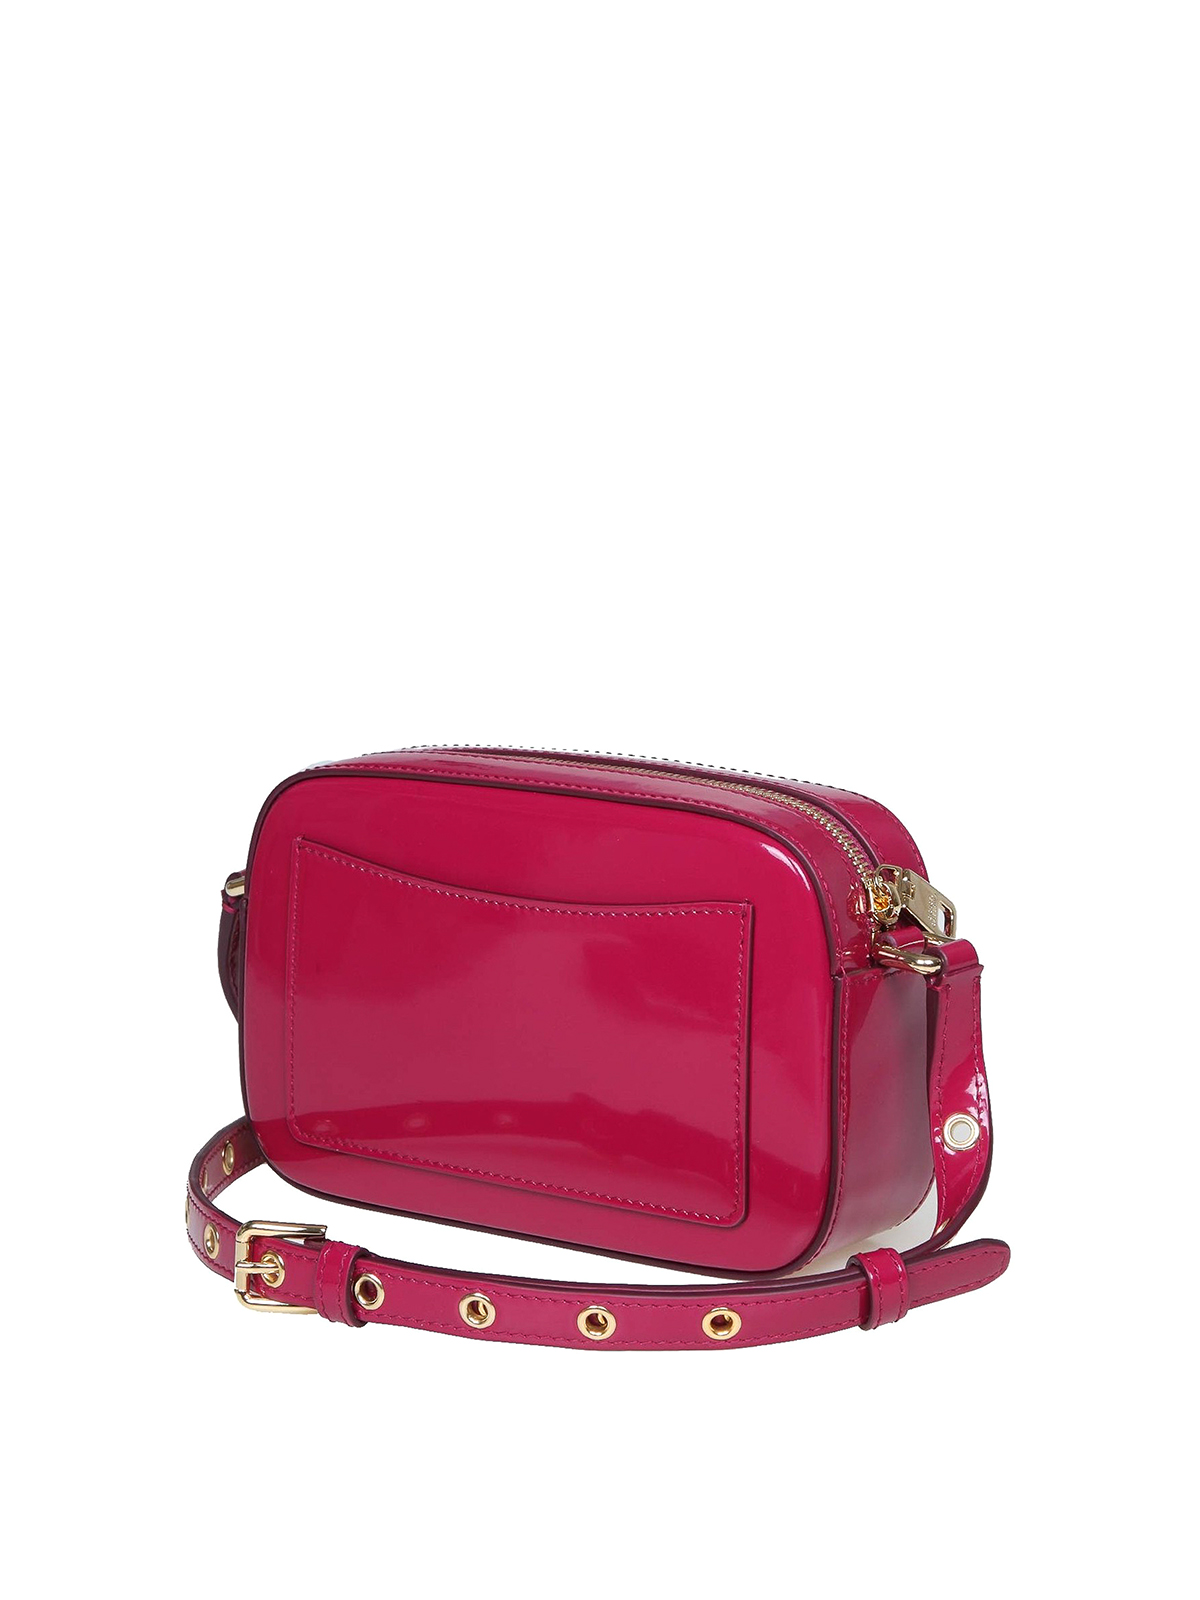 Cross body bags Dolce & Gabbana - Patent leather shoulder bag with logo -  BB7095A10378I484